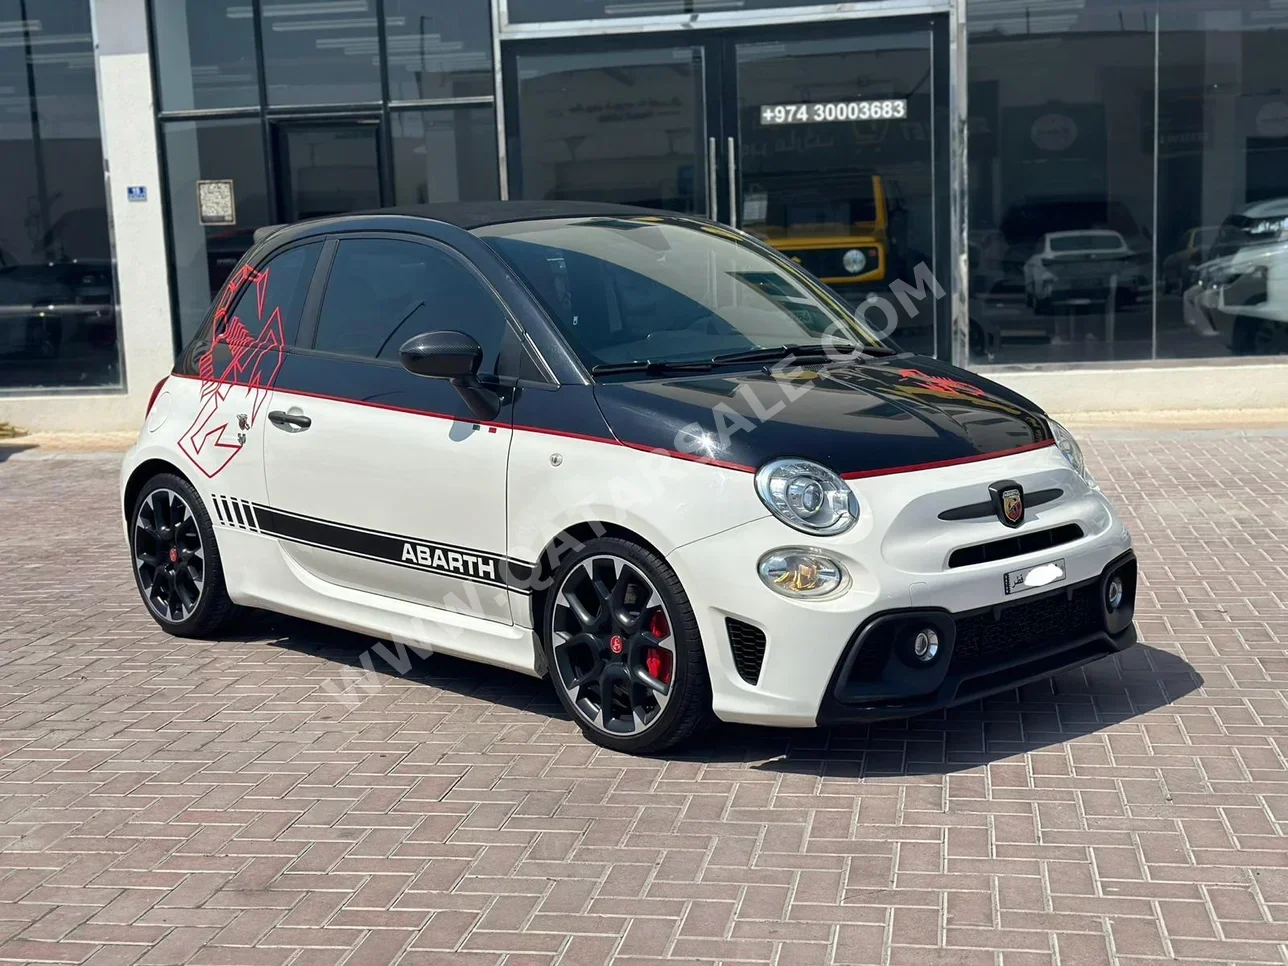 Fiat  595  Abarth  2020  Automatic  76,000 Km  4 Cylinder  Front Wheel Drive (FWD)  Hatchback  White